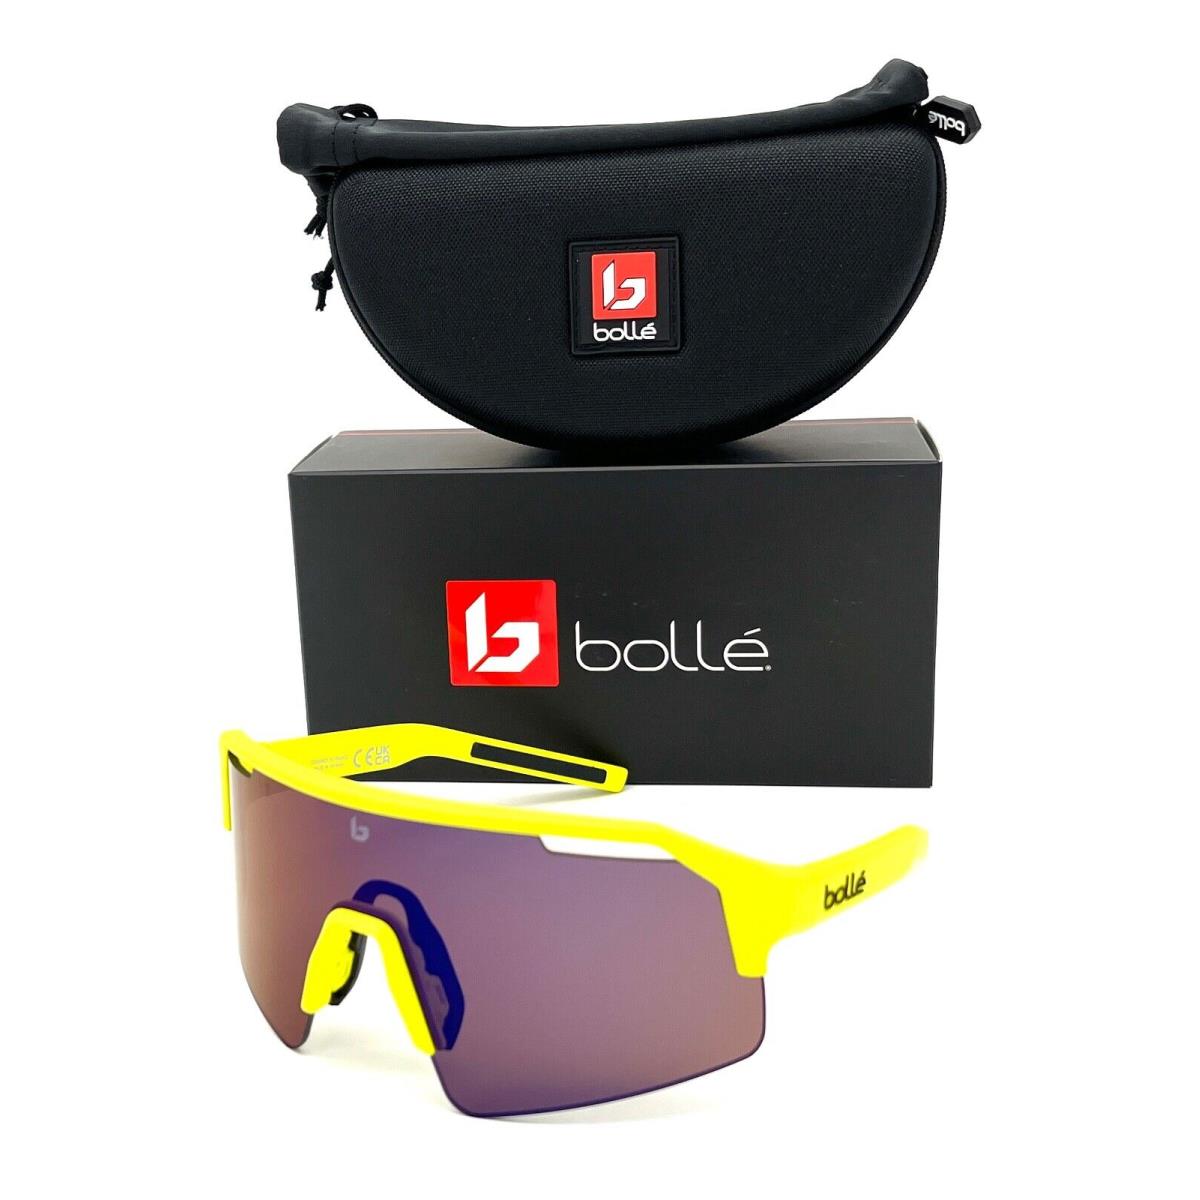 Bolle C-shifter Acid Yellow Matte / Brown Blue 140mm Sunglasses - Frame: Acid Yellow Matte, Lens: Brown Blue